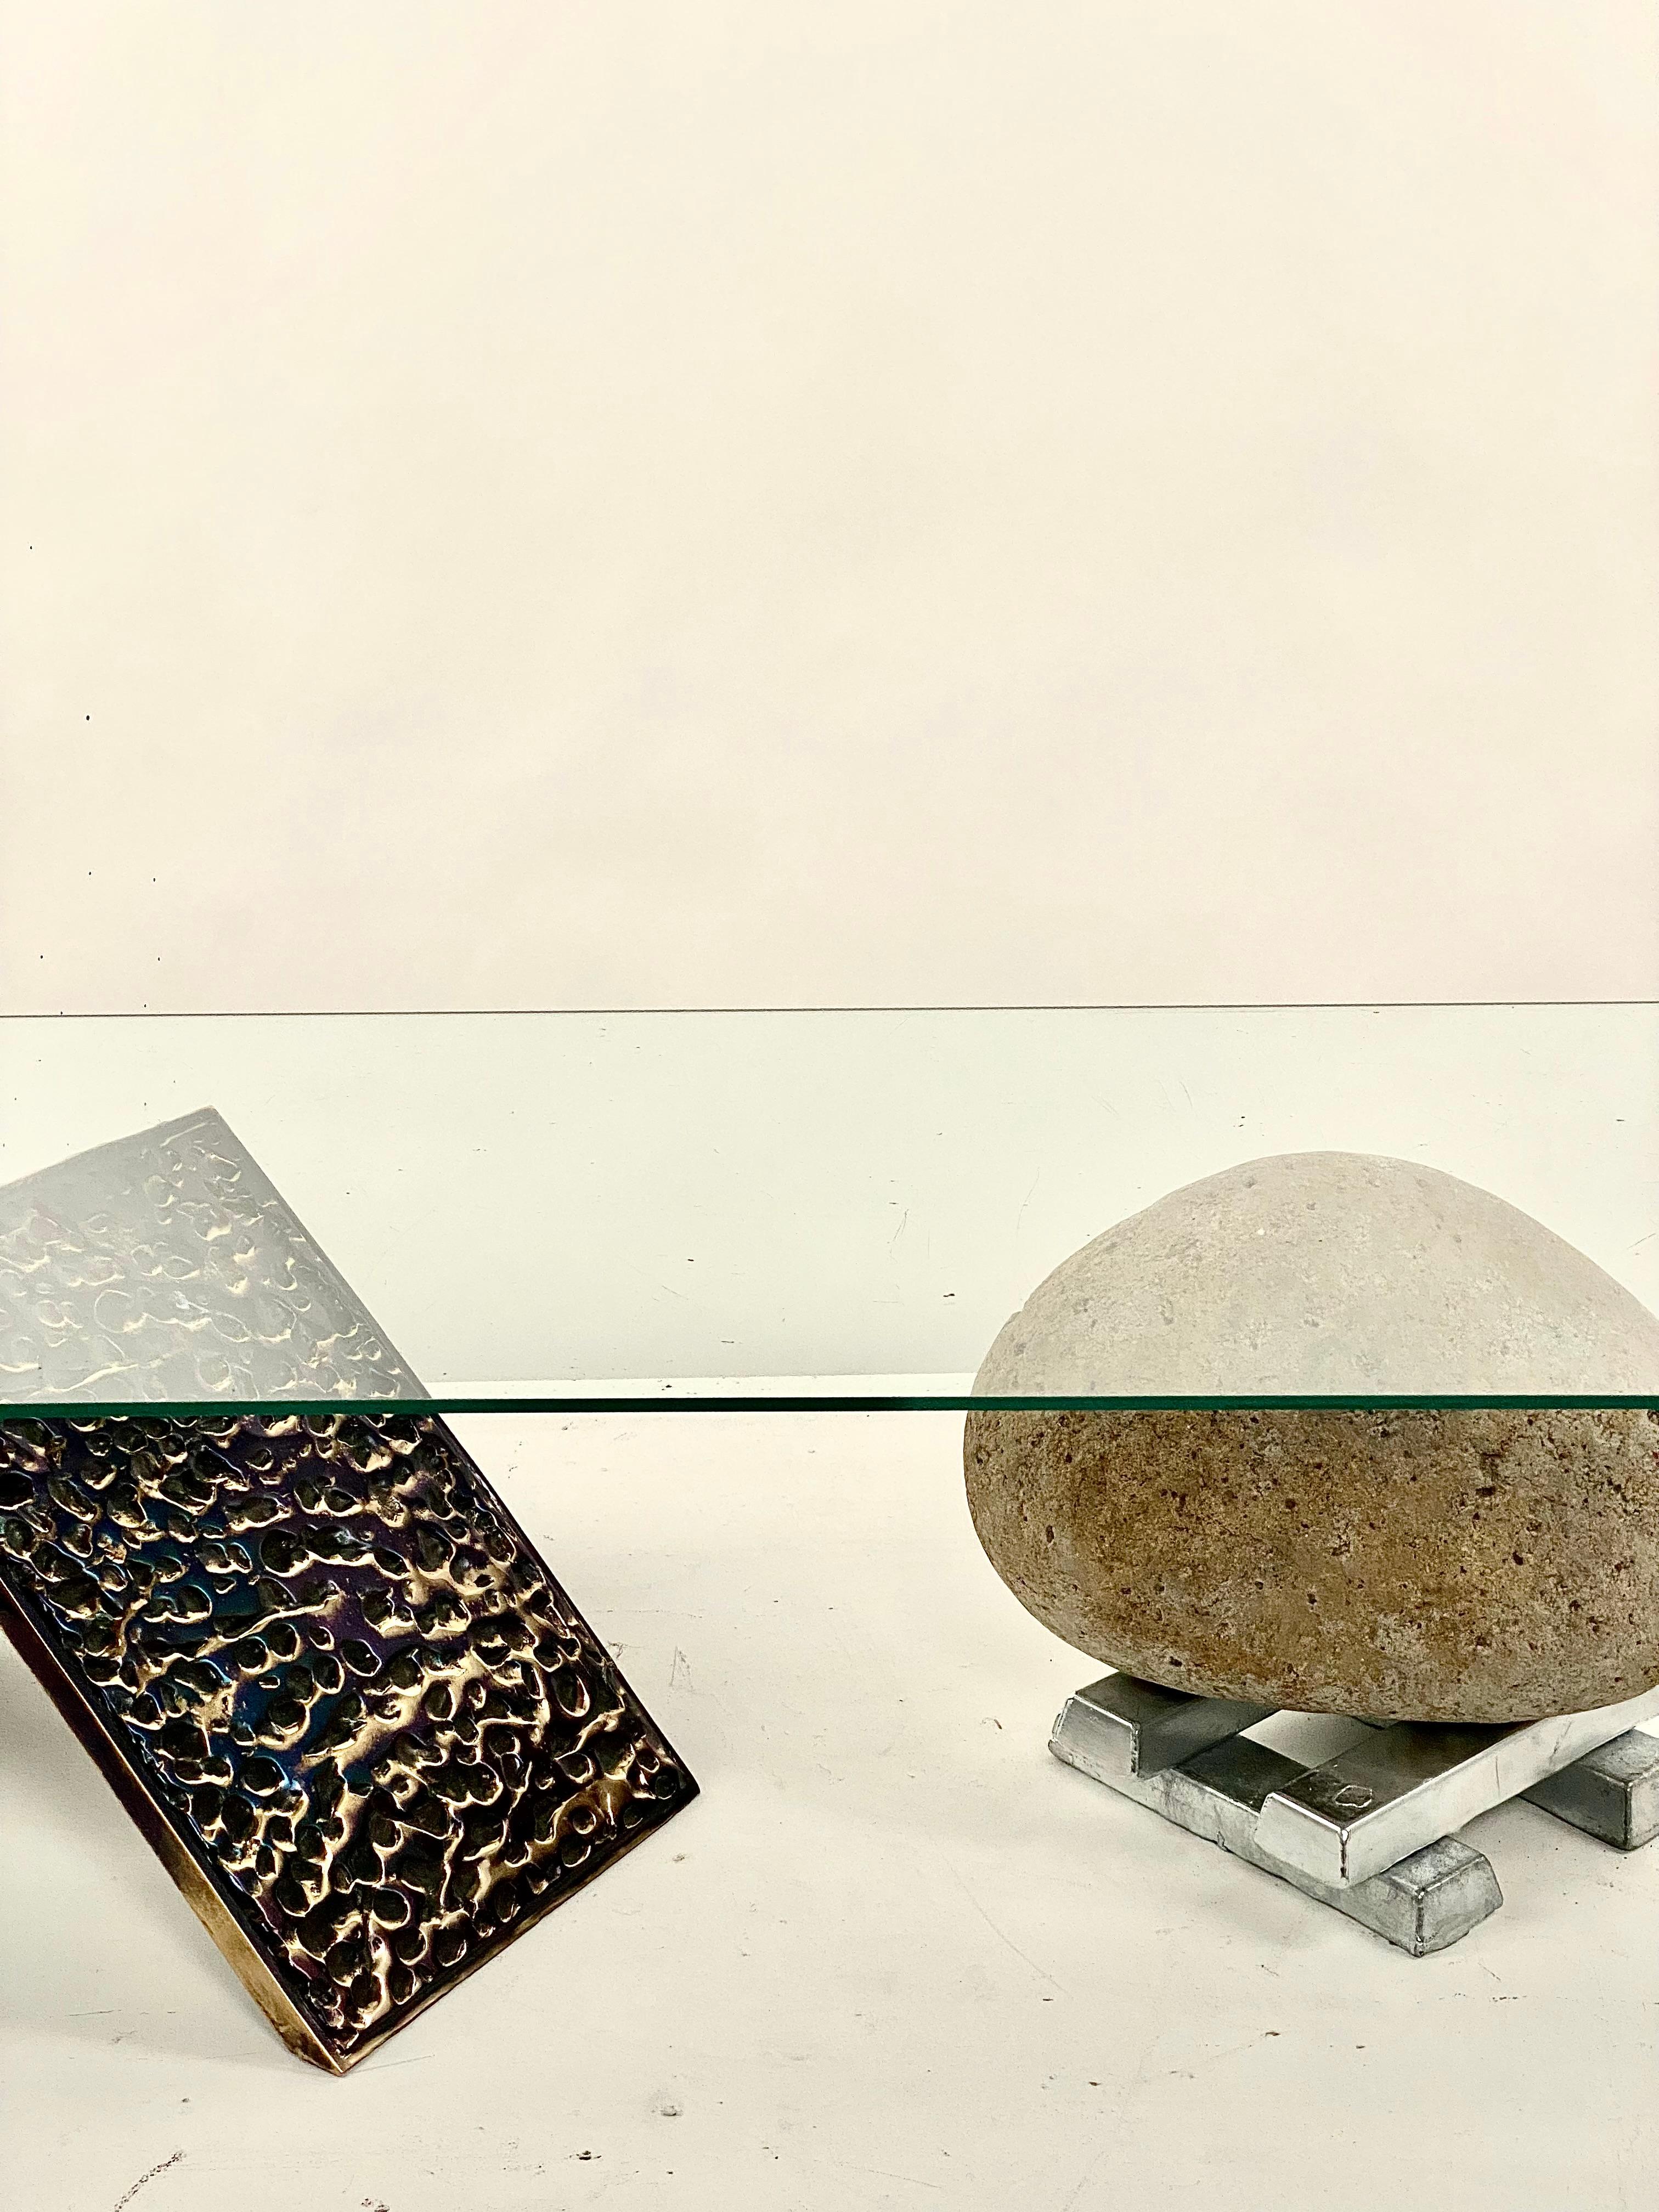 Contemporary Sculptural Coffee Table in Bronze, Pewter and Stone 21st Century by Mattia Biagi For Sale